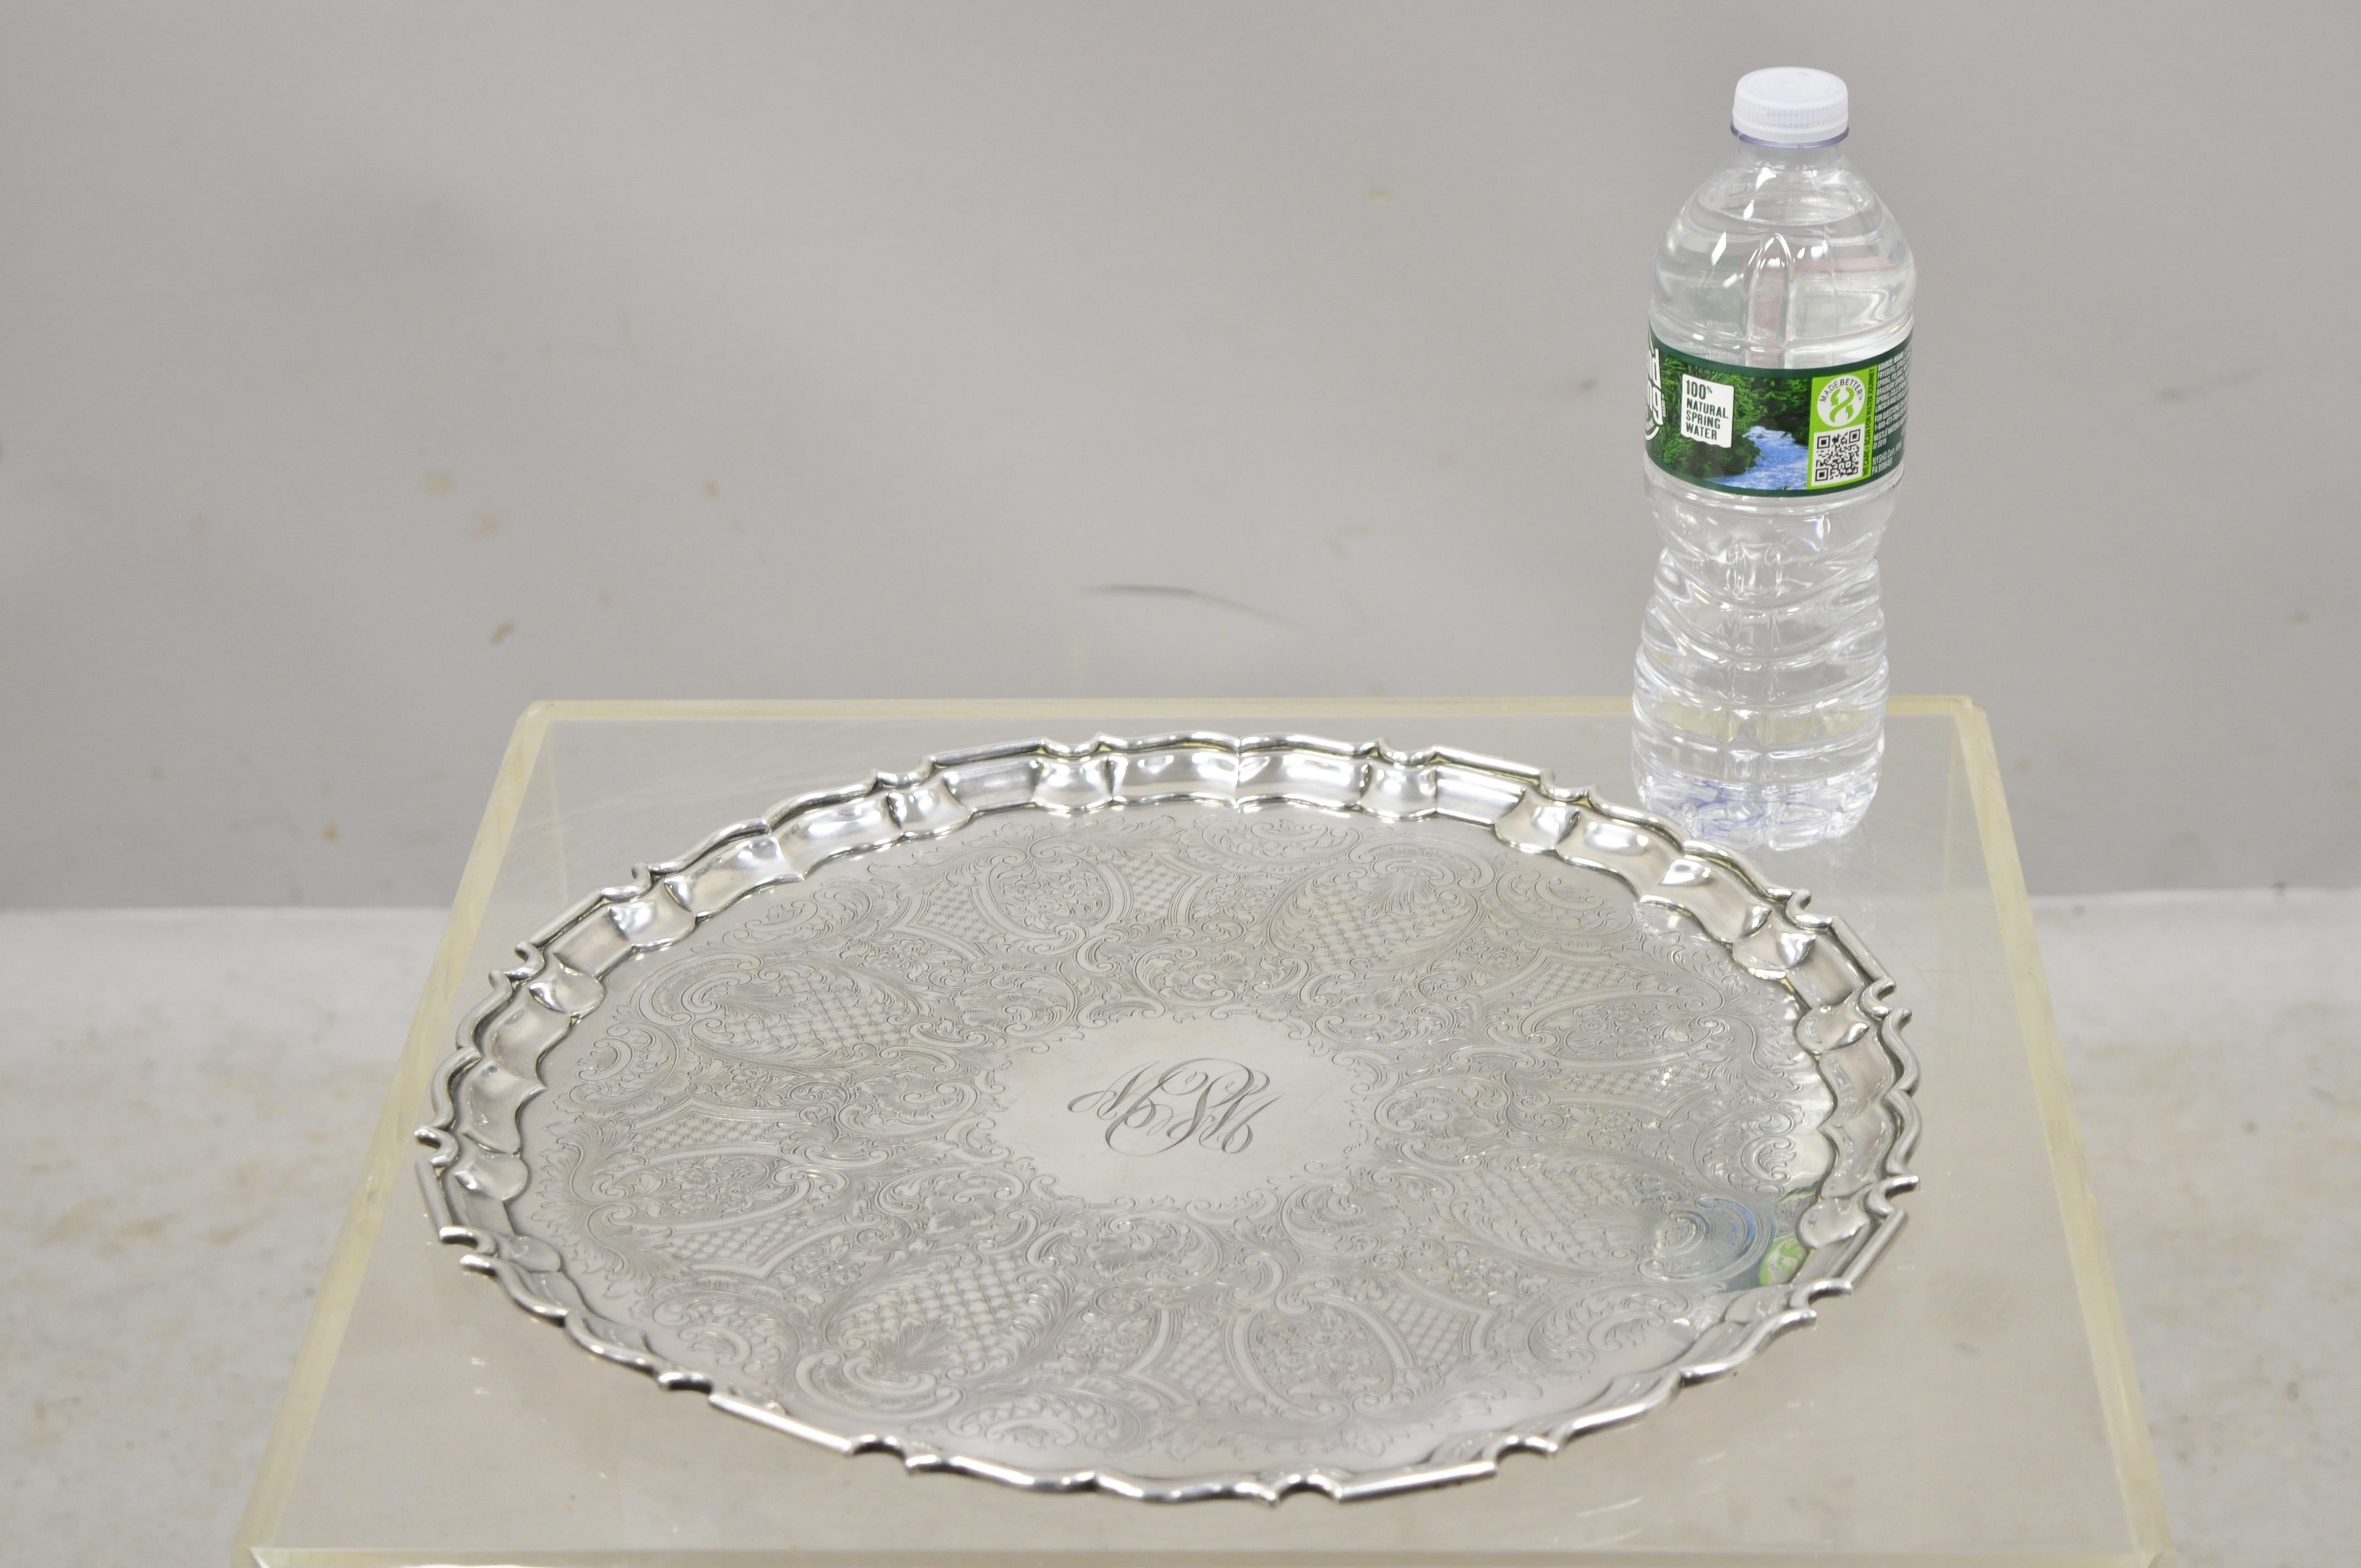 Antique Regency Silver Plate Scalloped Edge Floral Scrollwork Platter Tray For Sale 5